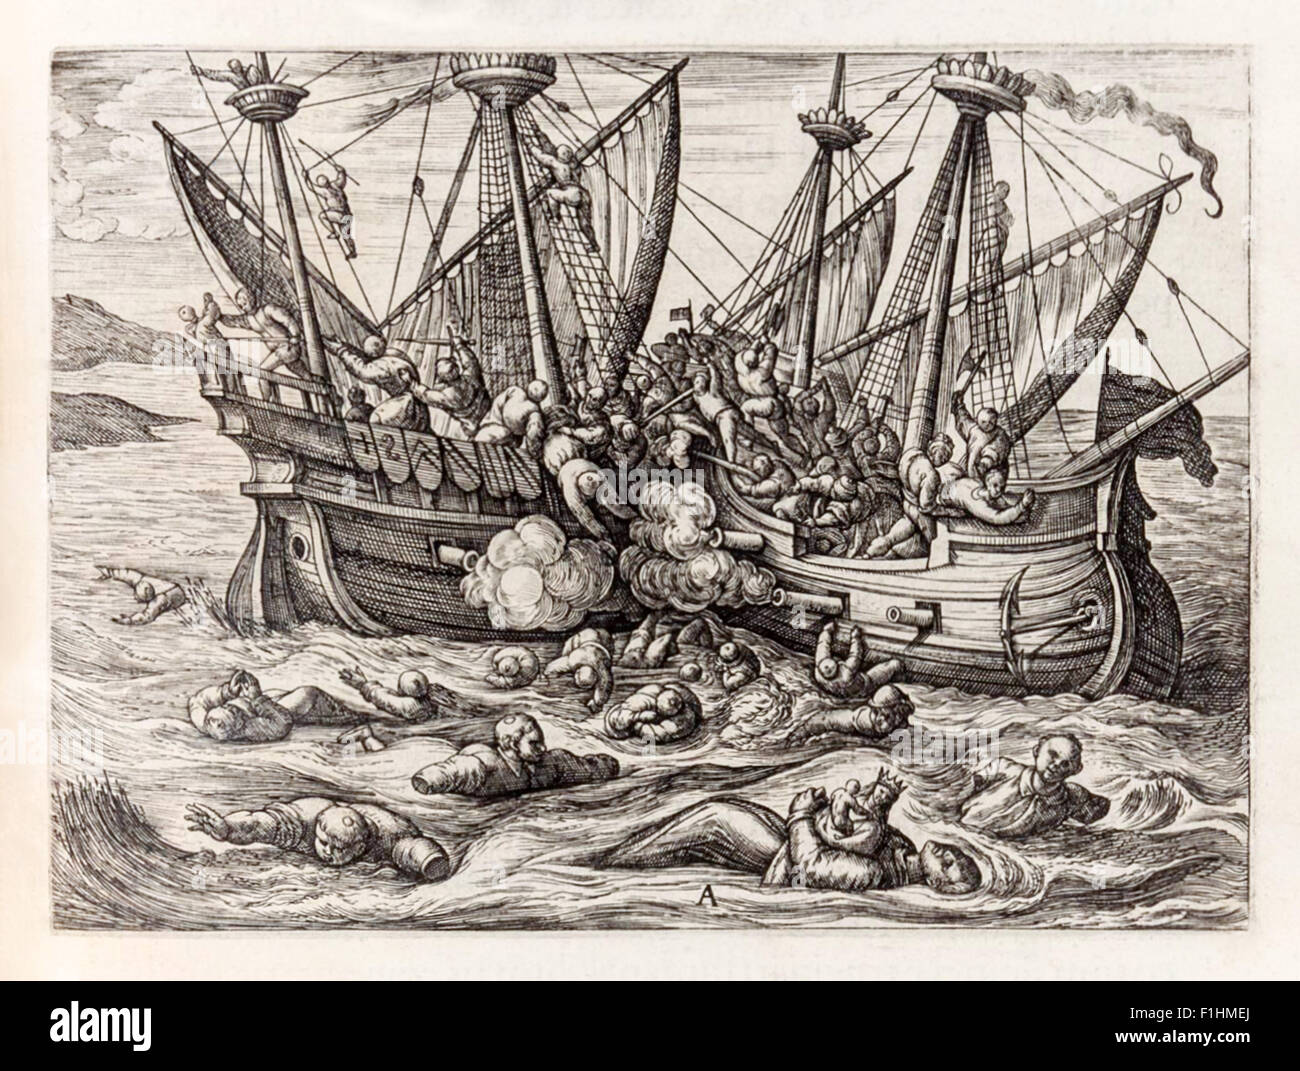 'Horribles cruautés des Huguenots' (Horrible cruelty of the Huguenots). Protestants Huguenots known as the 'Gueux de mer' attack a Catholic ship at sea during the French Wars of Religion (1562-98). Illustration from 'Theatrum Crudelitatum Haereticorum nostri temporis' by Richard Rowlands (1550-1640). See description for more information. Stock Photo